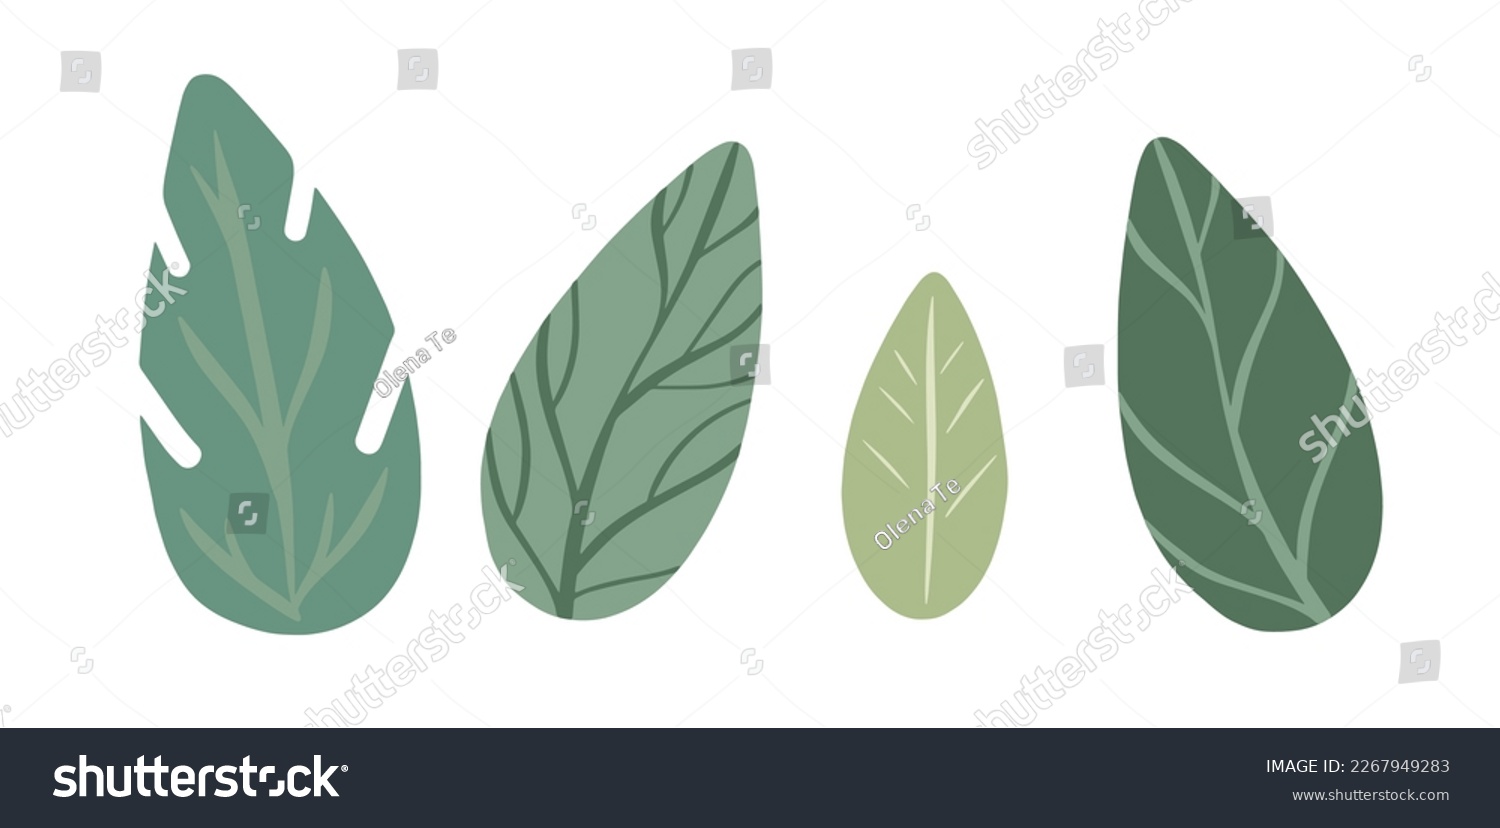 SVG of Vector leaf icons set. Garden plants with thin veins. Simple cartoon style illustration. Many botanical elements for trendy textile print design, packaging, advertising layouts. Hand drawn flat art. svg